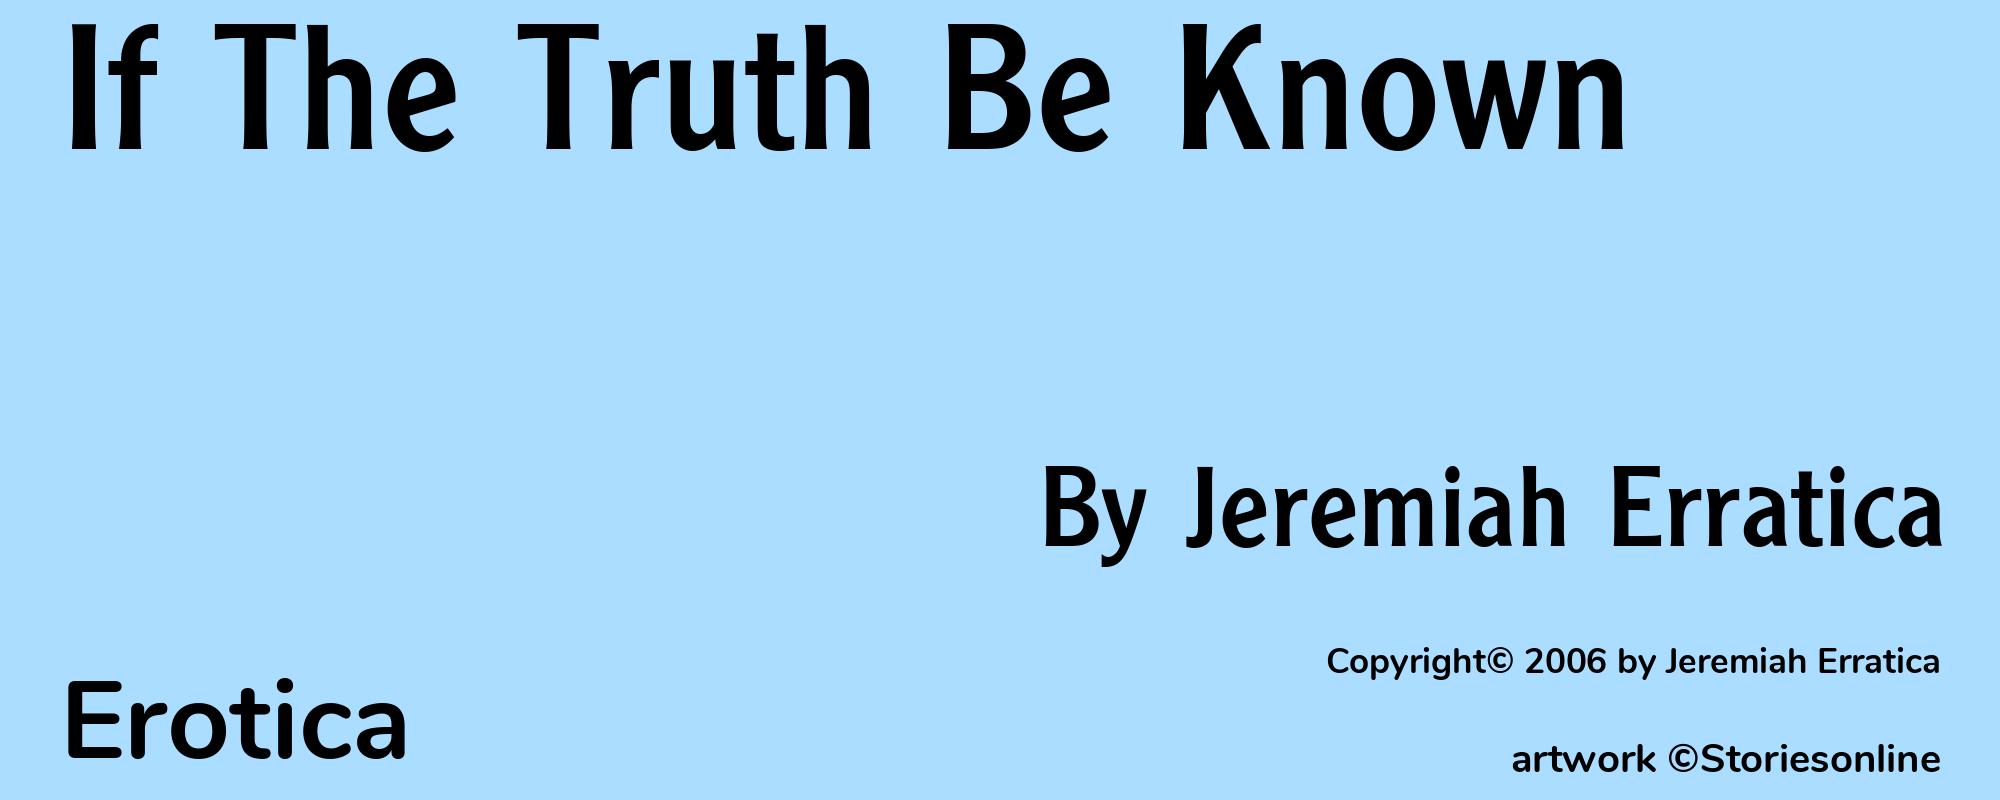 If The Truth Be Known - Cover